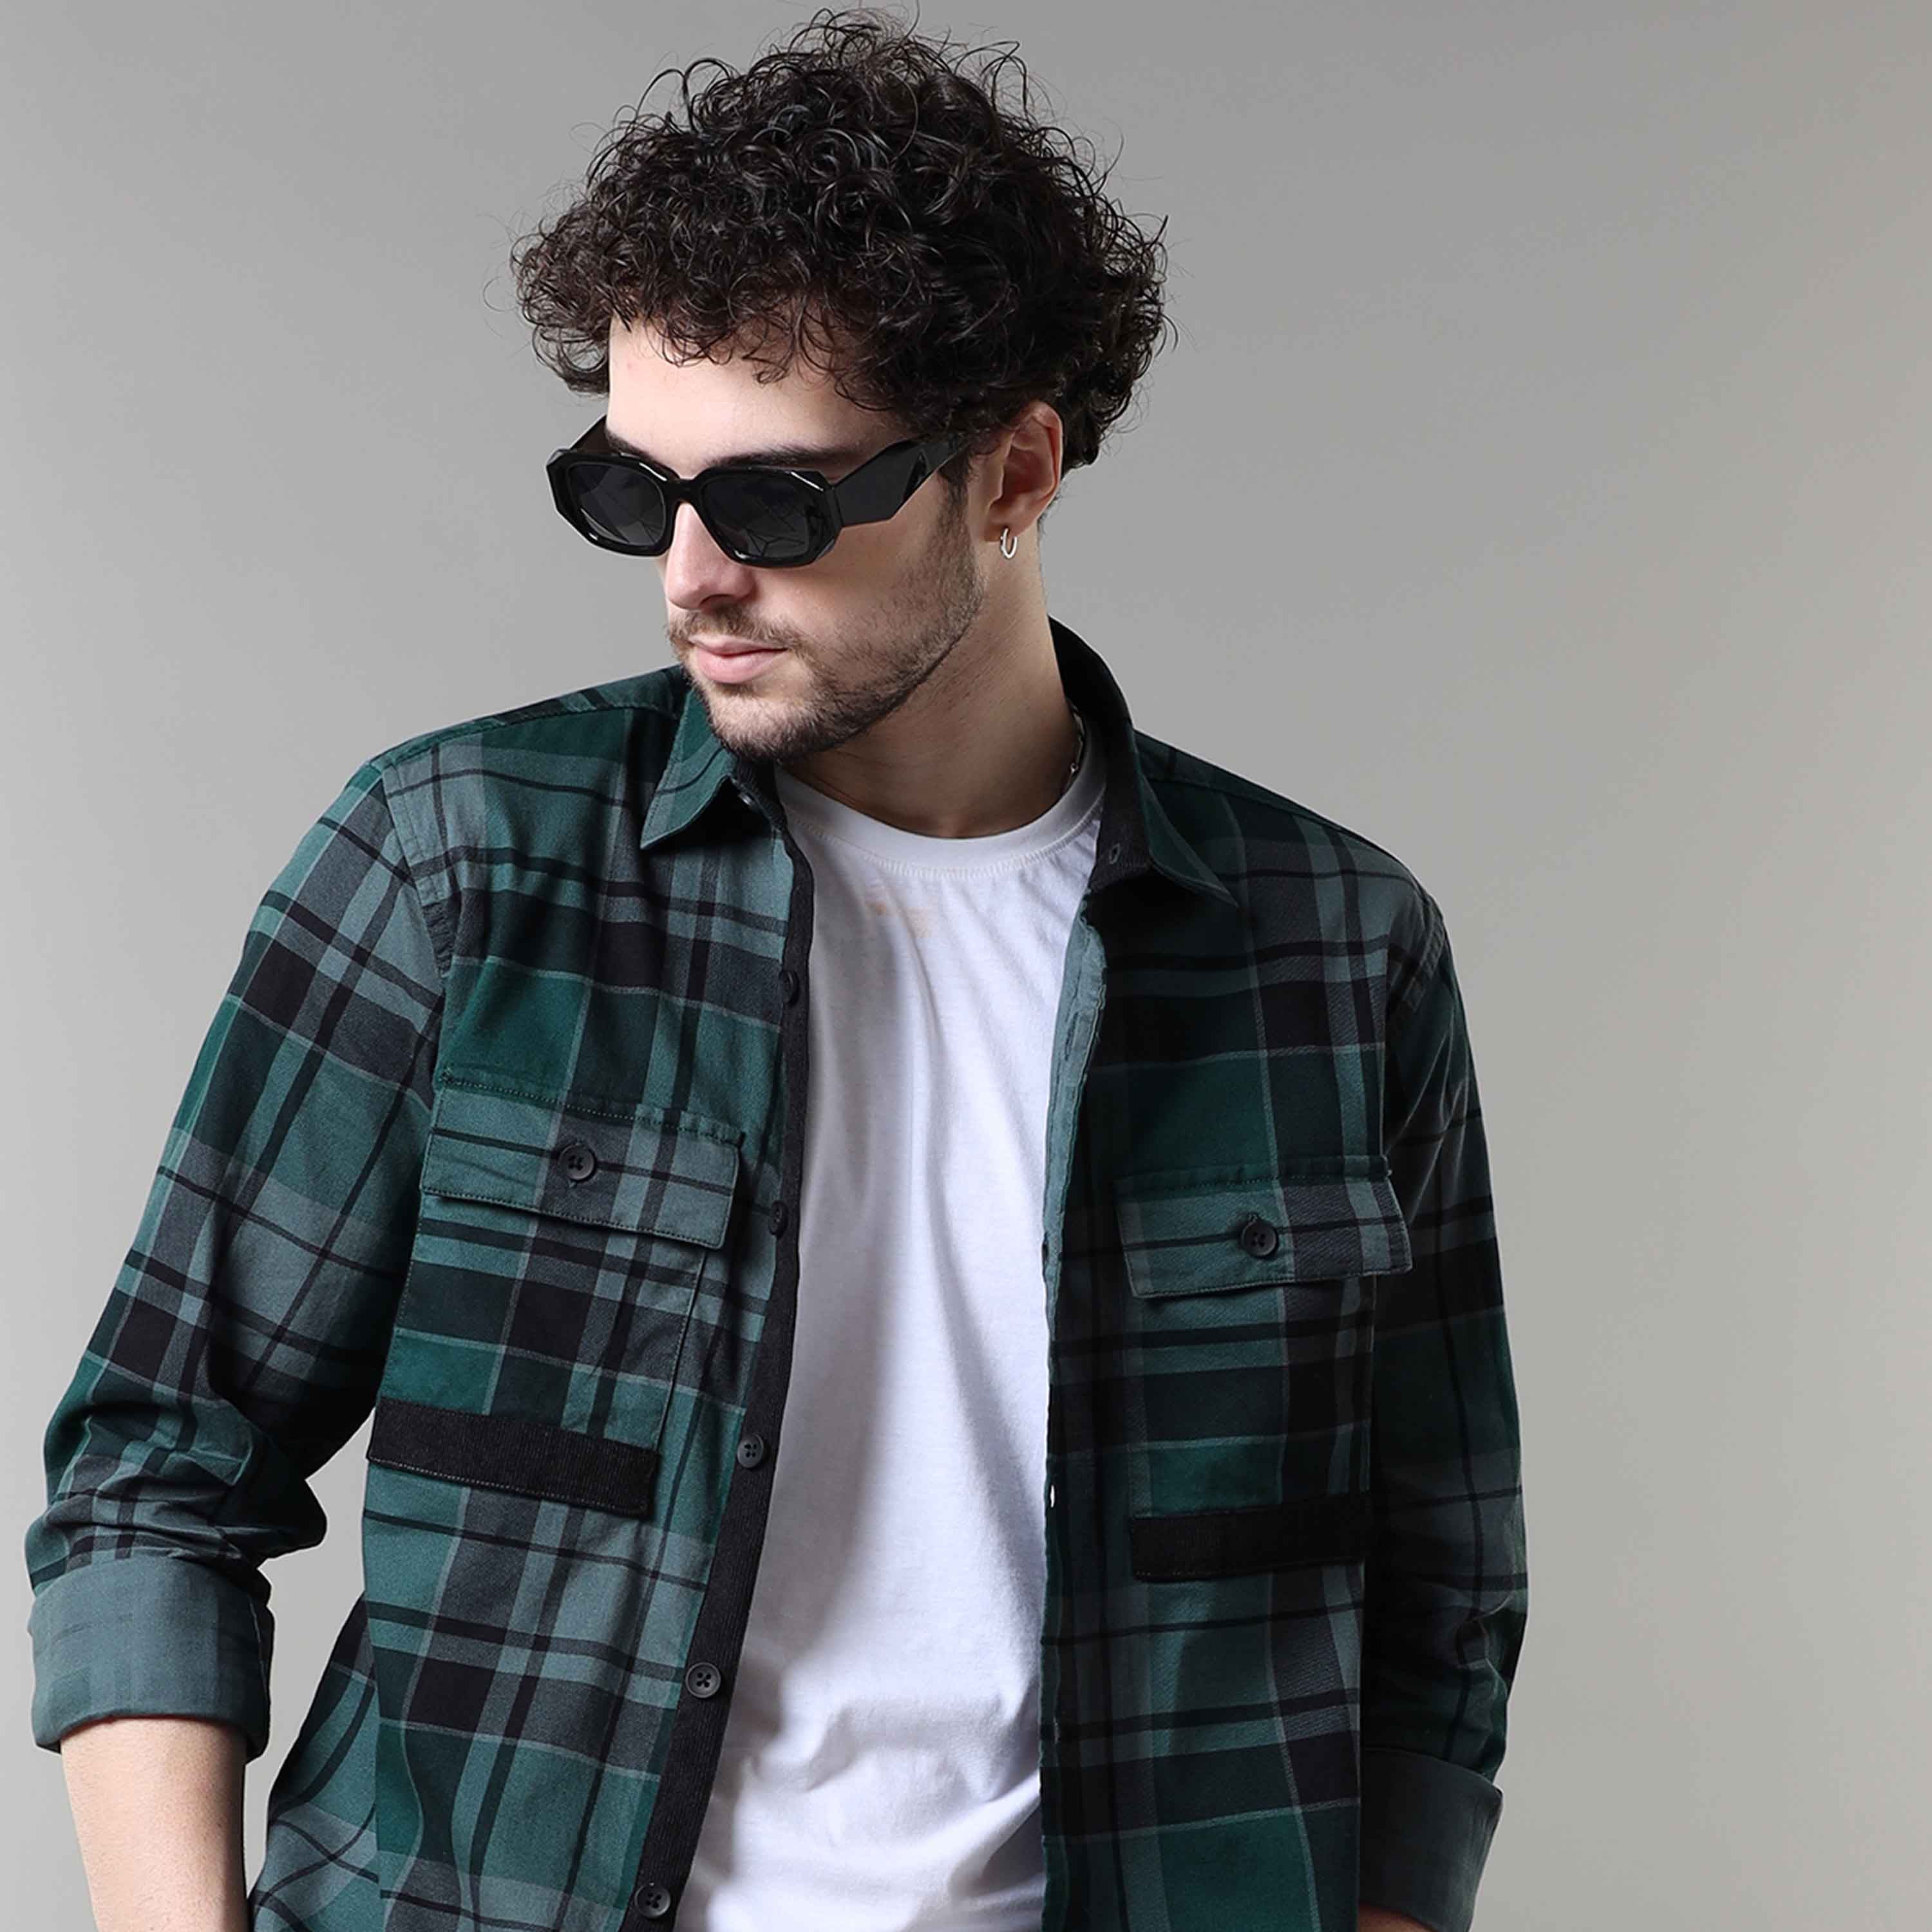 Buy Latest Green Check Shirt Online at Great PriceRs. 1399.00